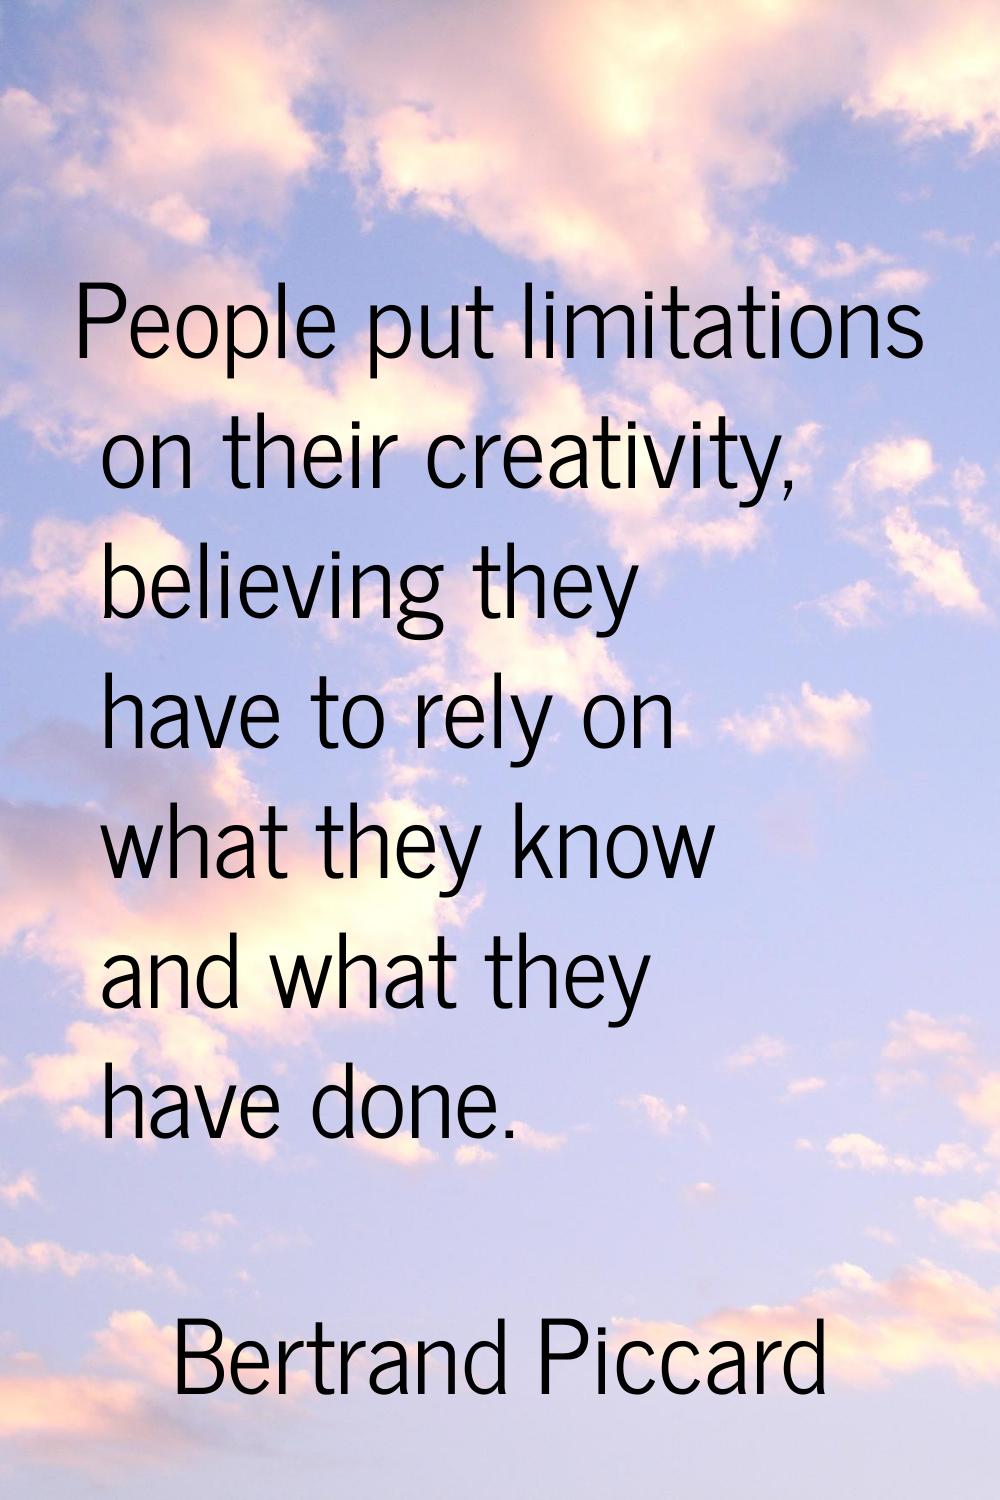 People put limitations on their creativity, believing they have to rely on what they know and what 